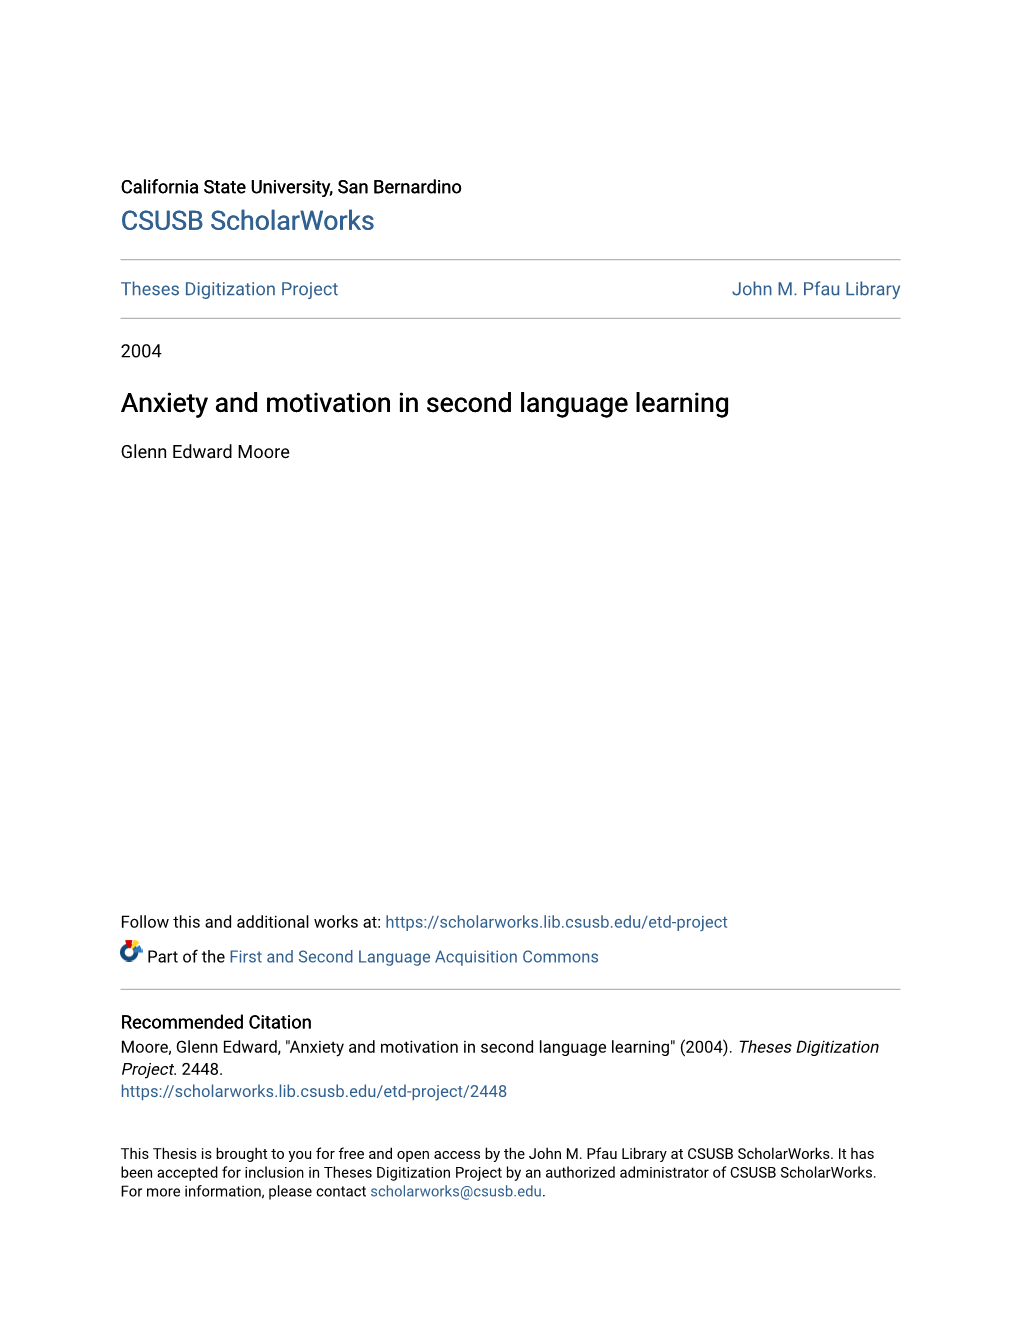 Anxiety and Motivation in Second Language Learning